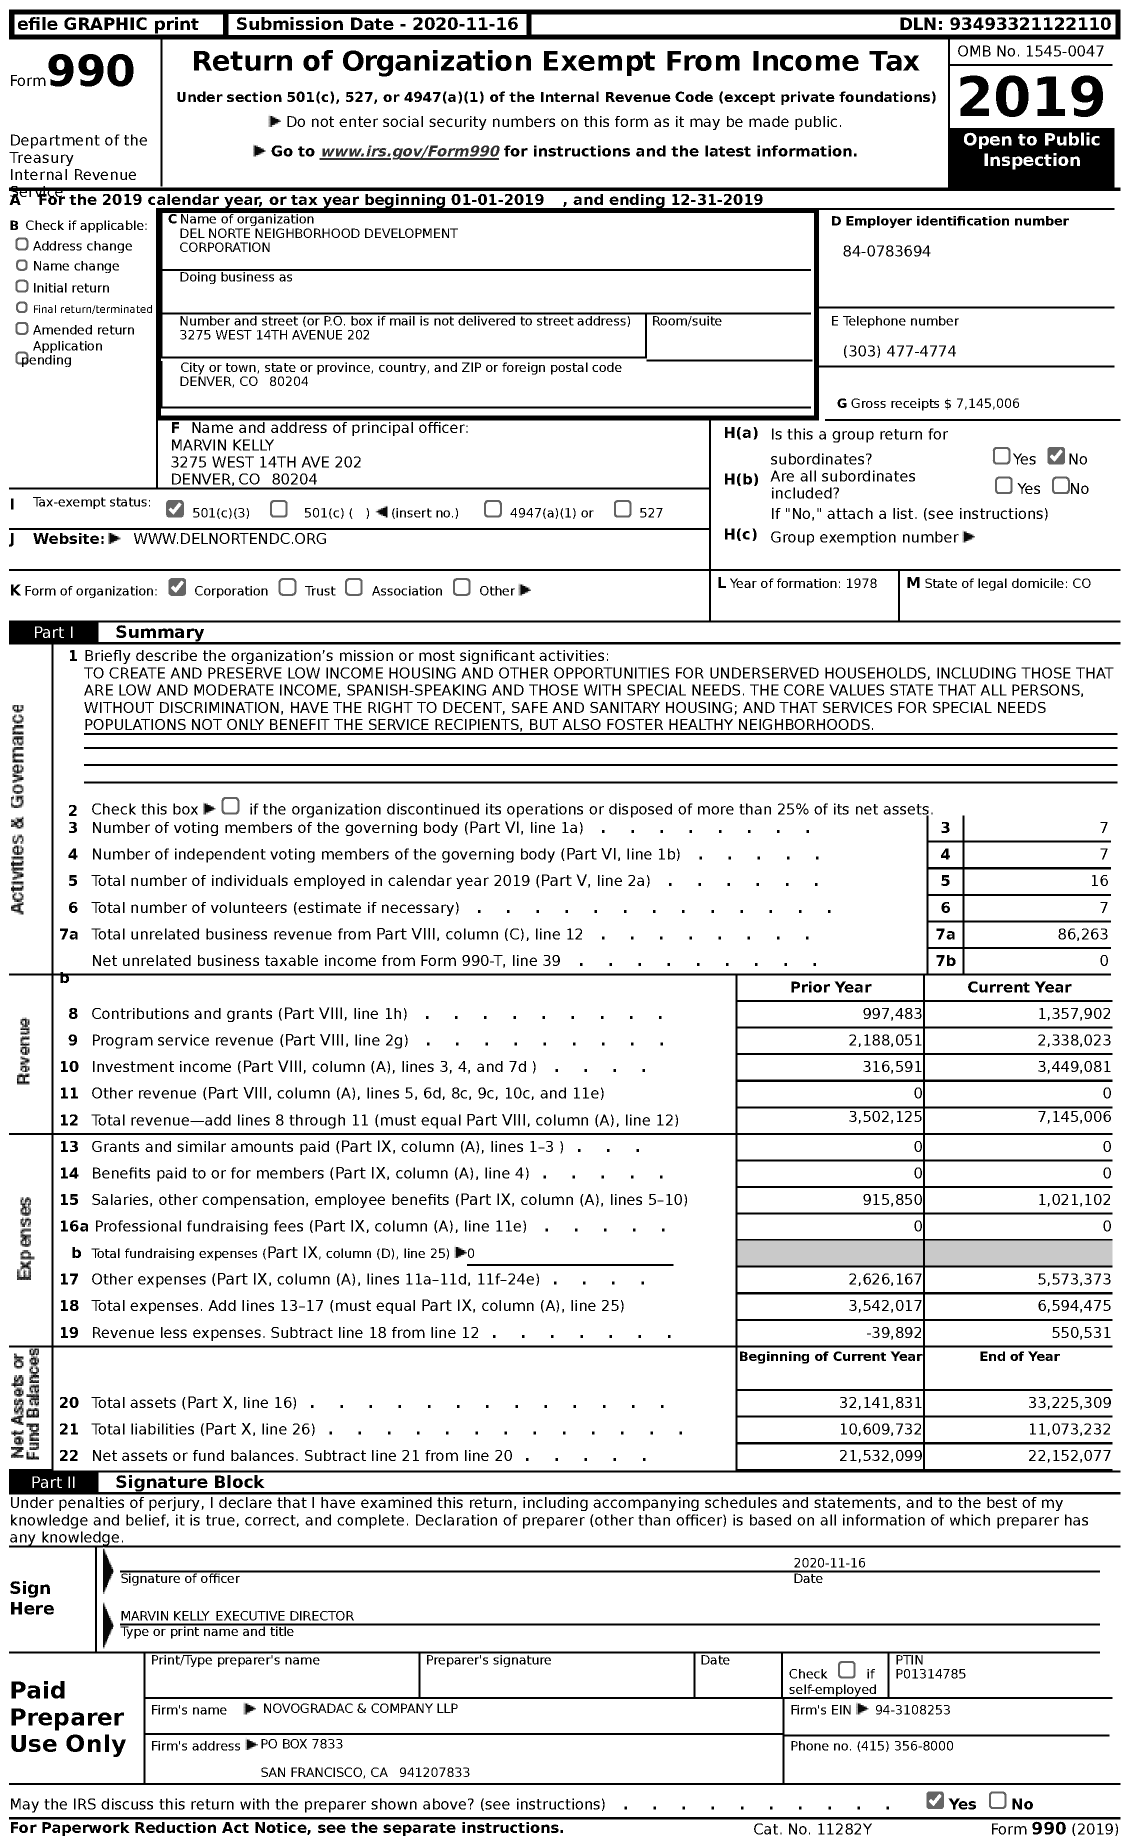 Image of first page of 2019 Form 990 for Del Norte Neighborhood Development Corporation